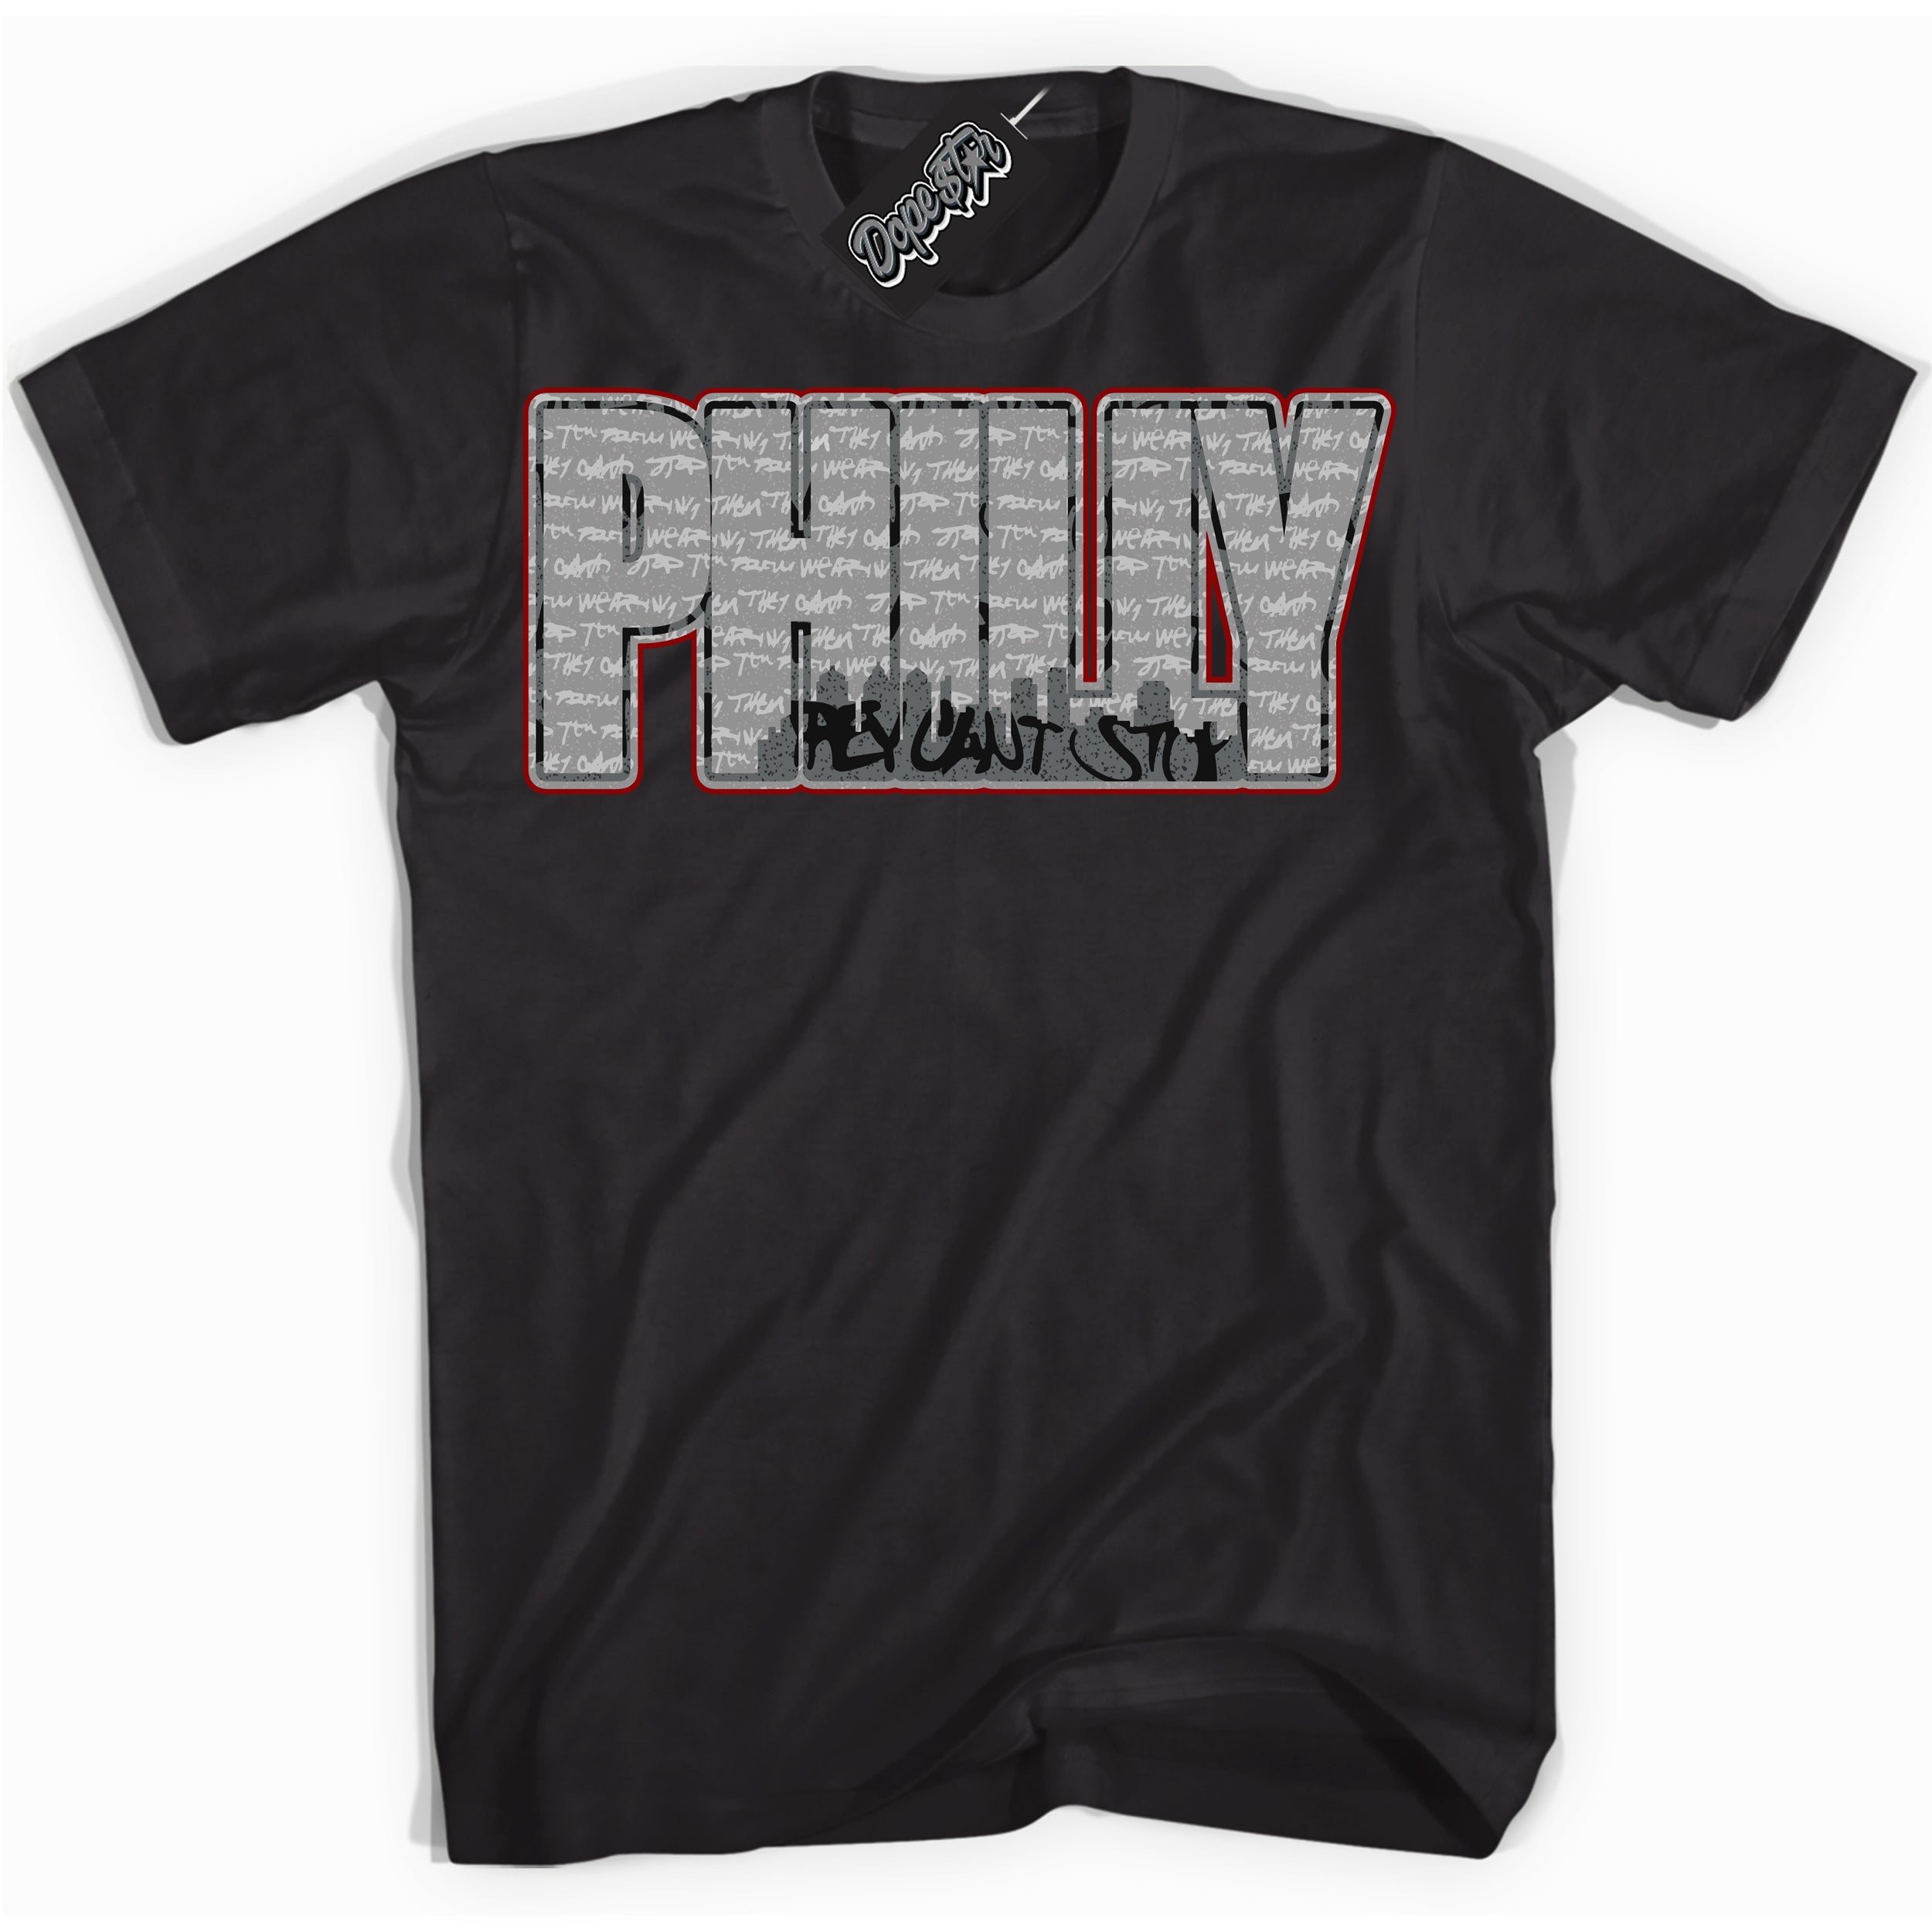 Cool Black Shirt with “ Philly ” design that perfectly matches Rebellionaire 1s Sneakers.